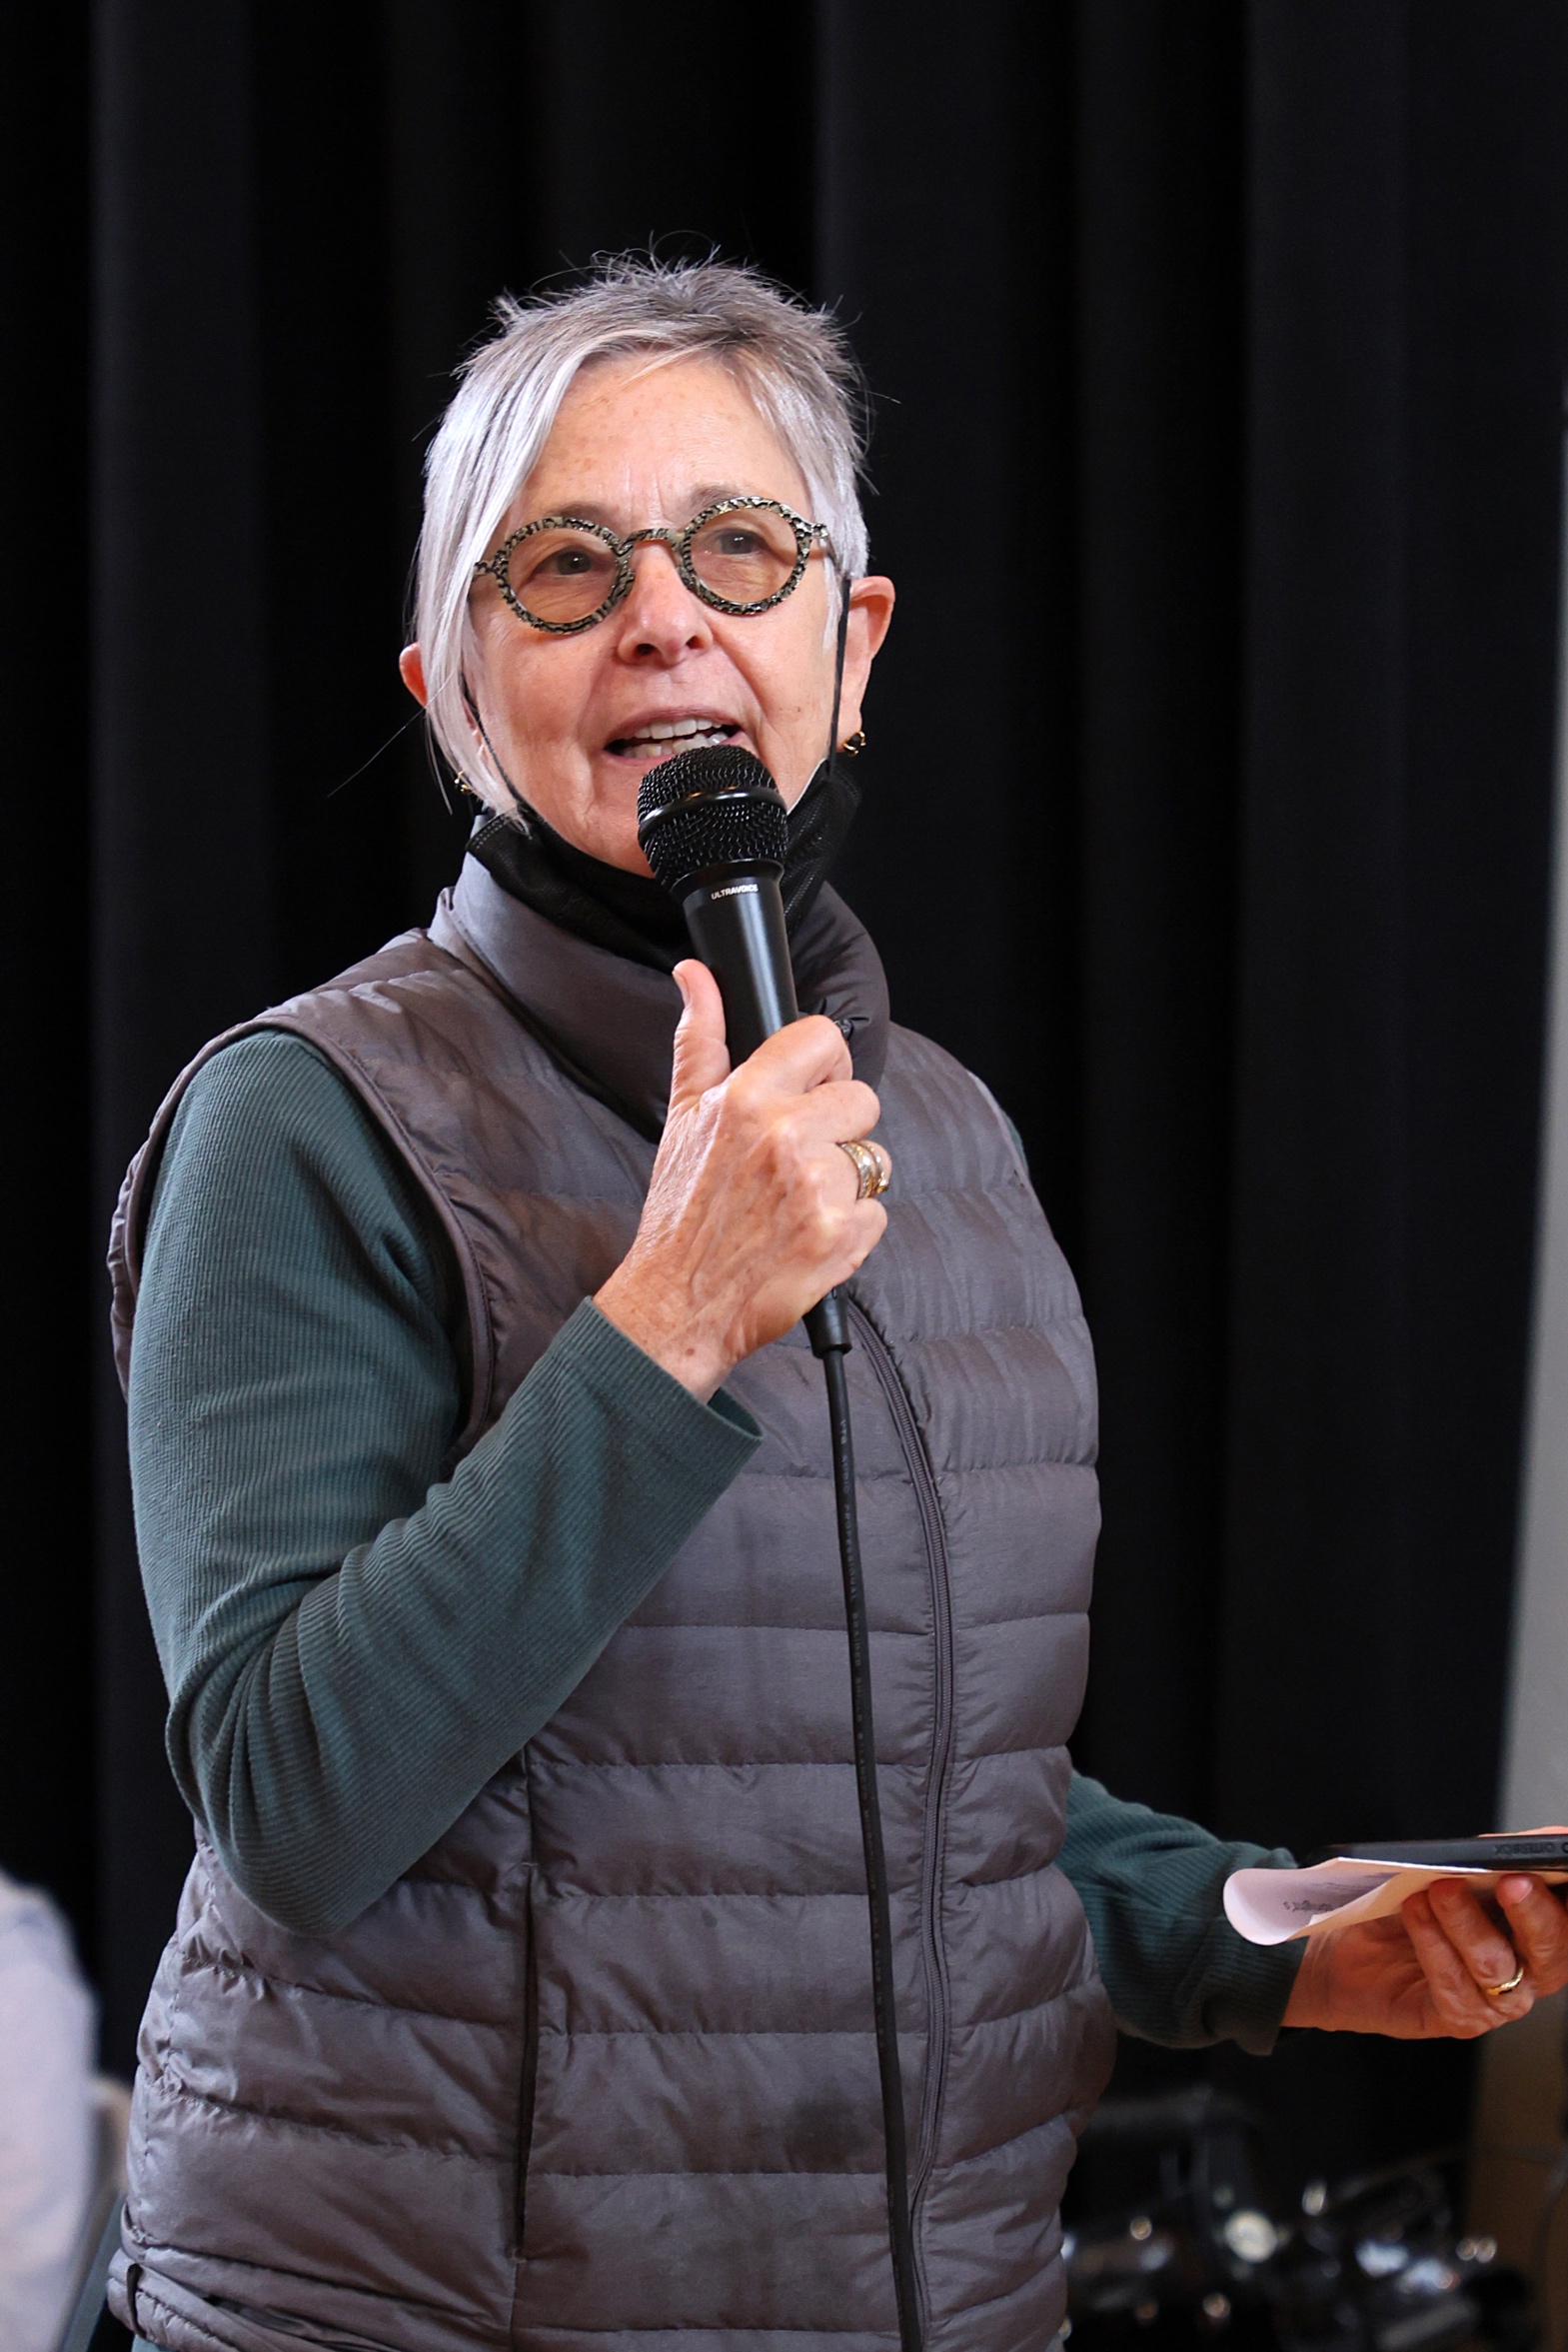 Victoria Marks, short gray hair and glasses, speaks into a microphone, against a black backdrop, wearing gray puffy vest and green long sleeve shirt.